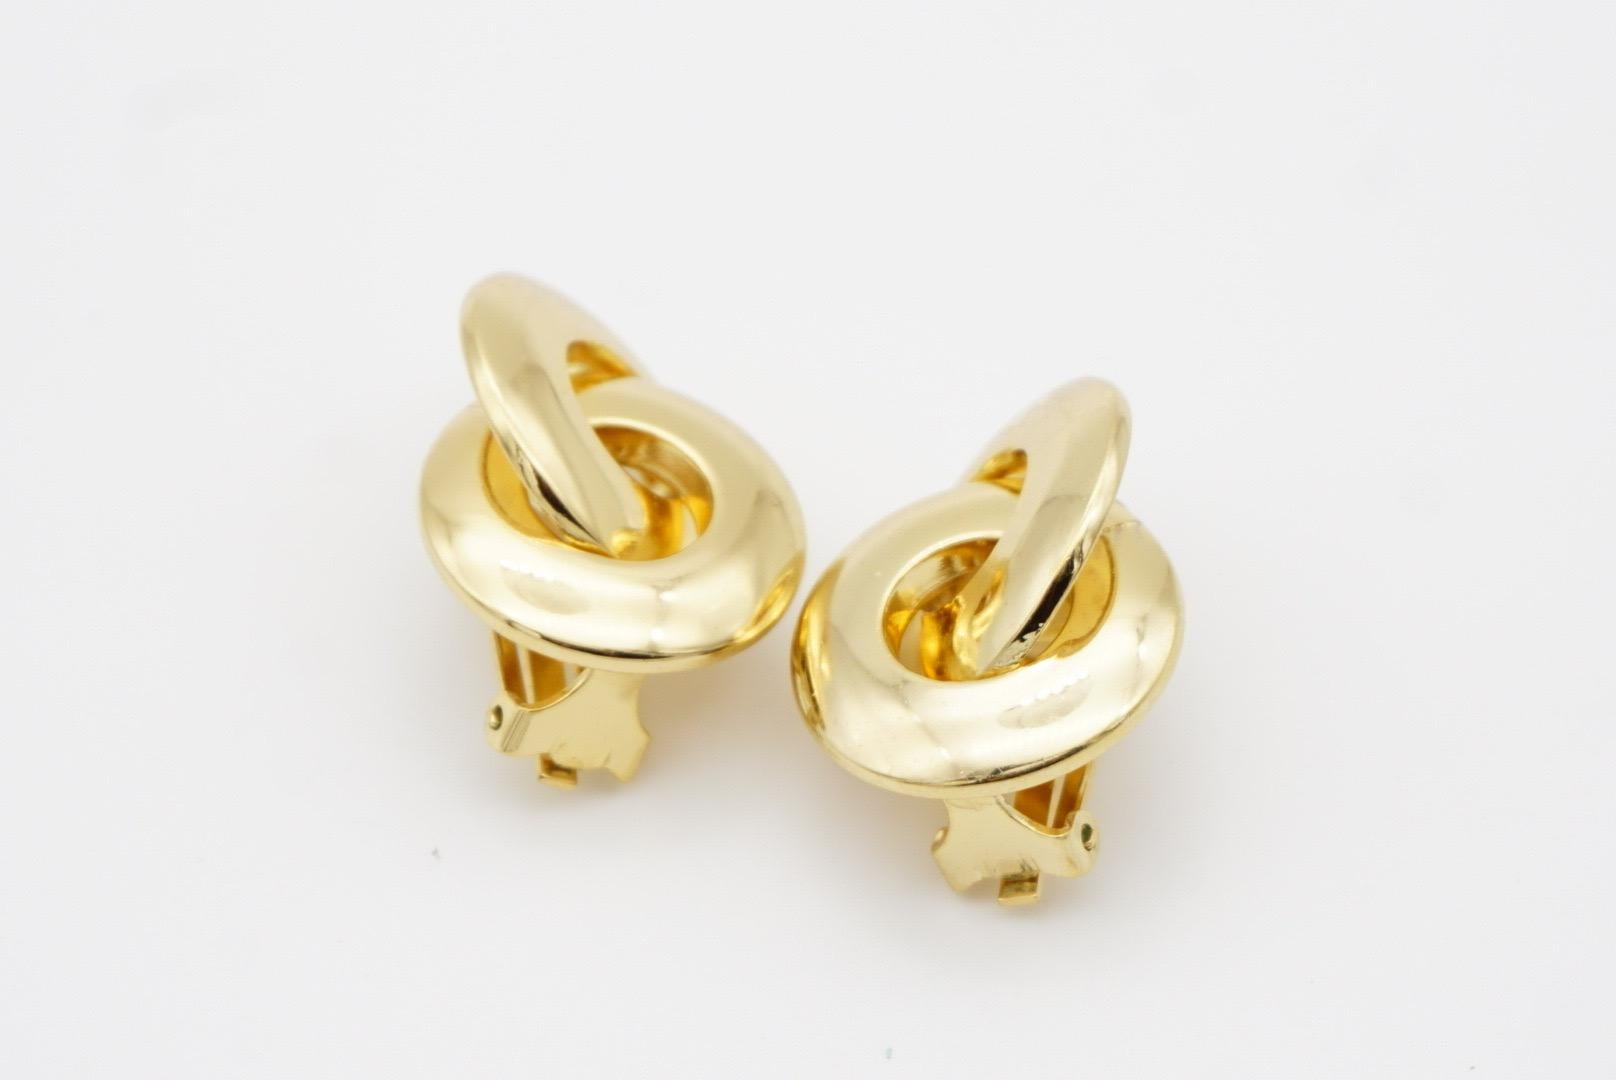 Christian Dior Vintage 1980s Large Glow Twist Intertwined Knot Clip Earrings For Sale 10